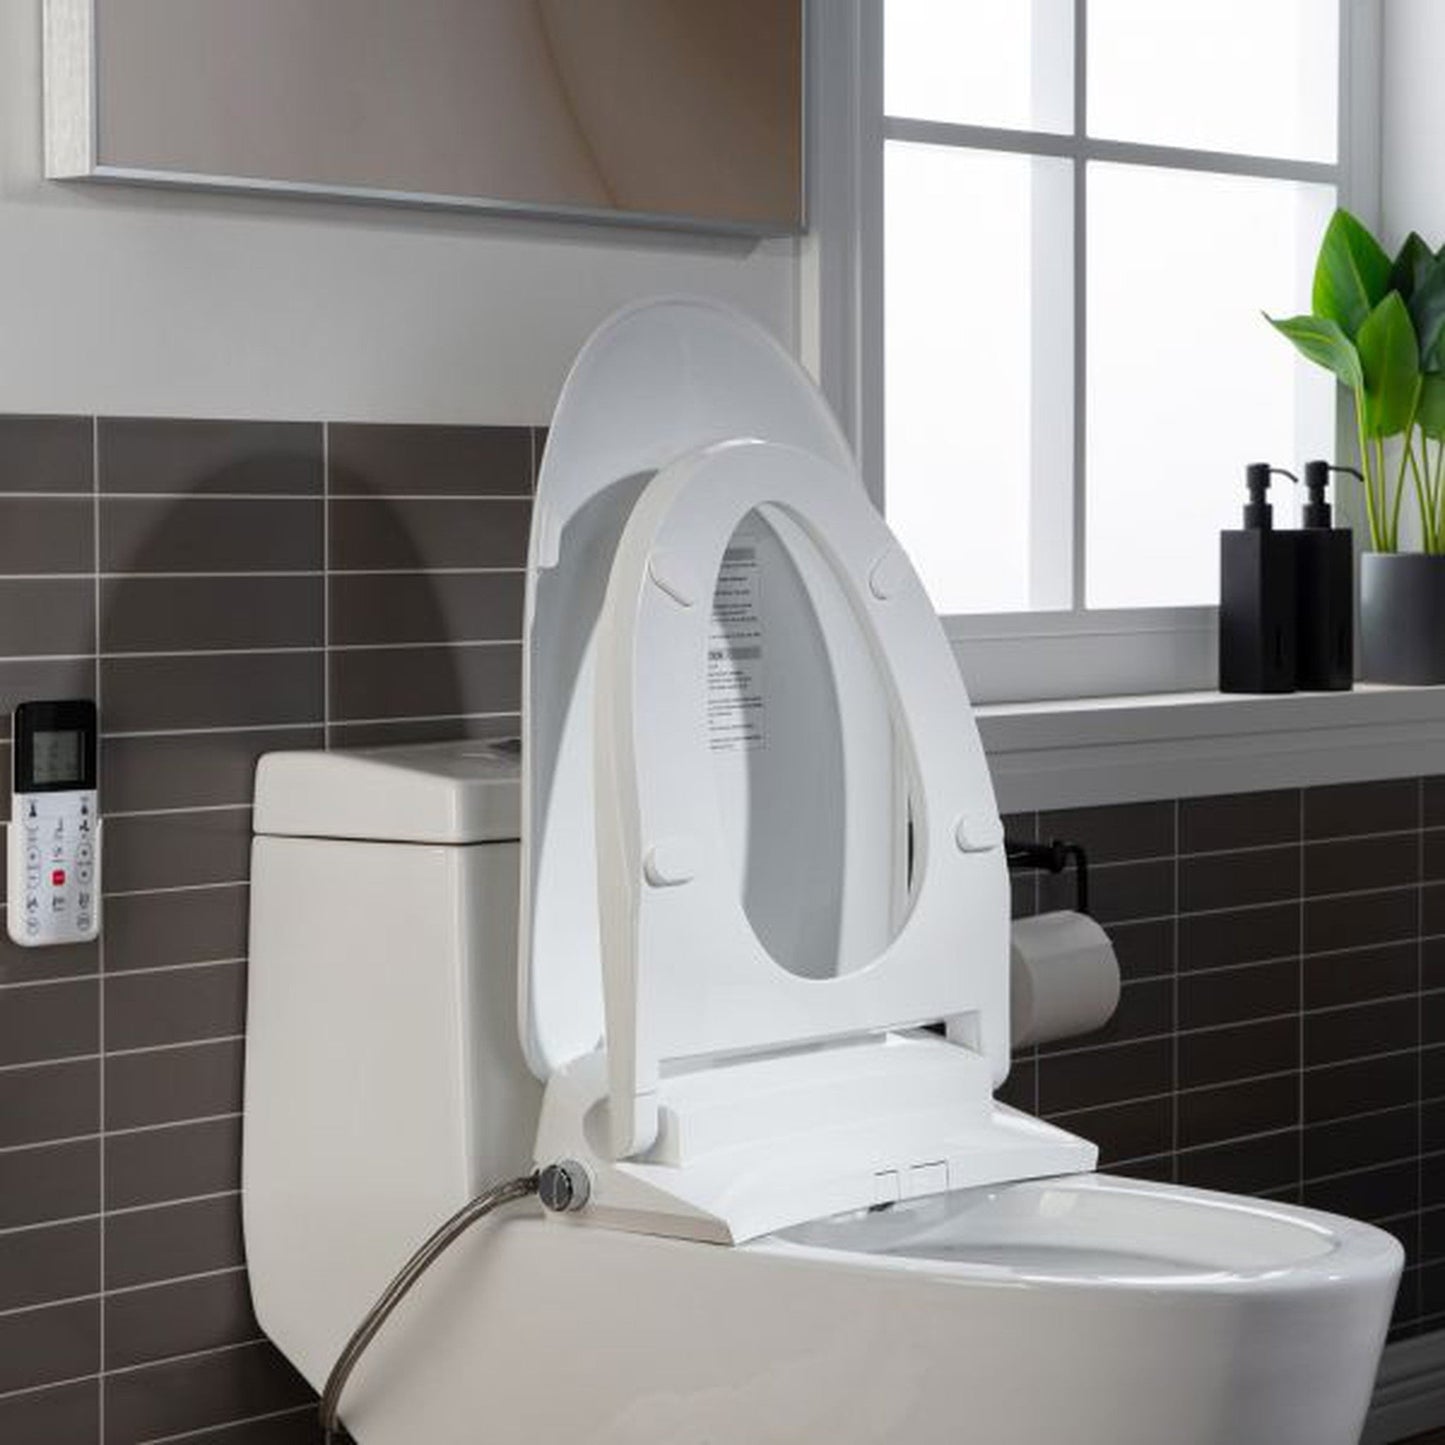 WoodBridge T-0041 White Elongated One Piece Toilet With Smart Bidet Seat, Electronic Advanced Self Cleaning, Soft Close Lid, Adjustable Water Temperature, LED Nightlight, Heated Seat, Warm Air Dryer